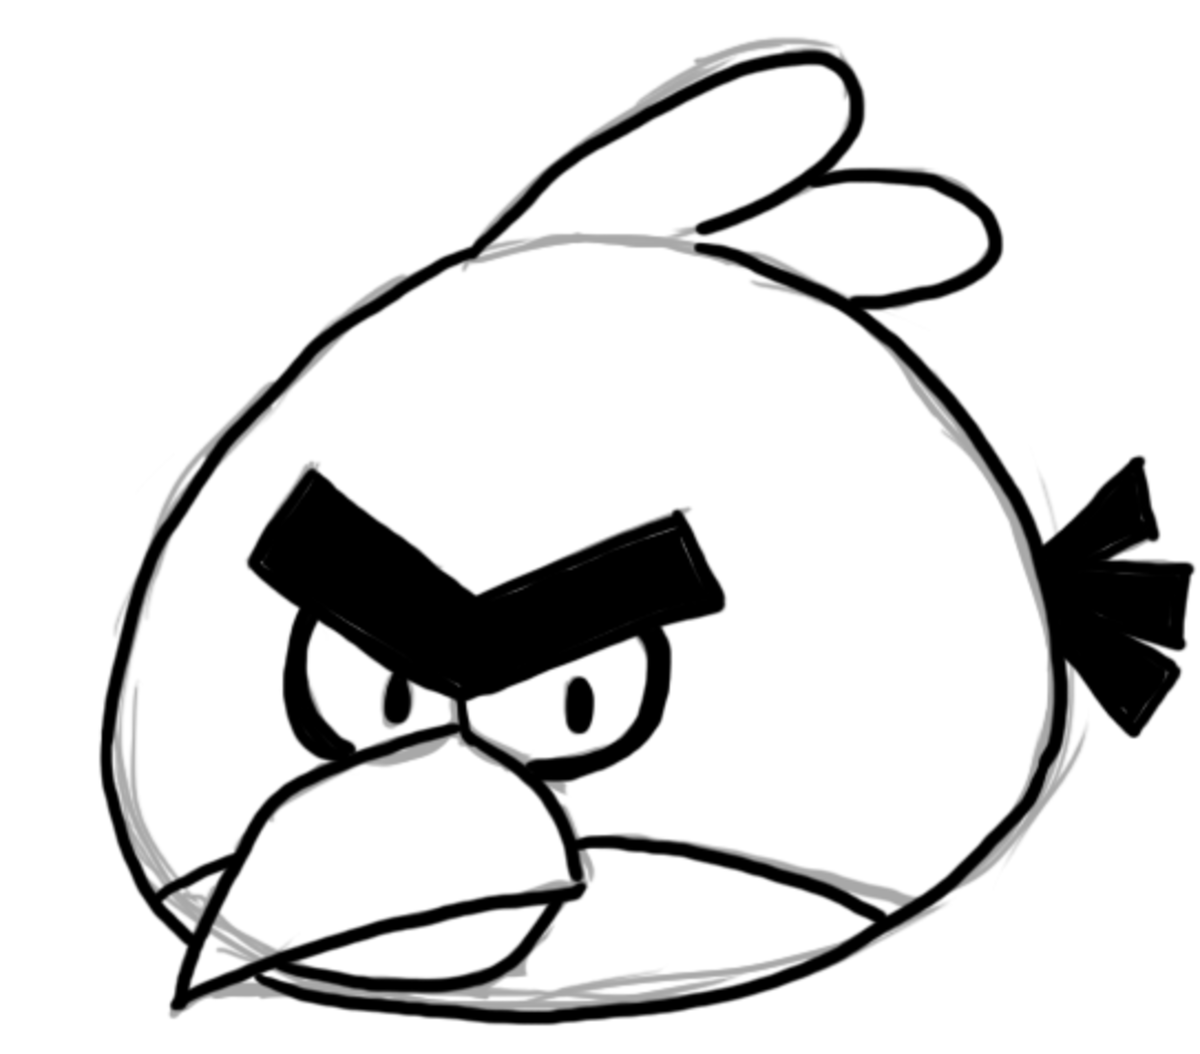 How To Draw Pig of Angry Birds Step by Step - [14 Easy Phase]